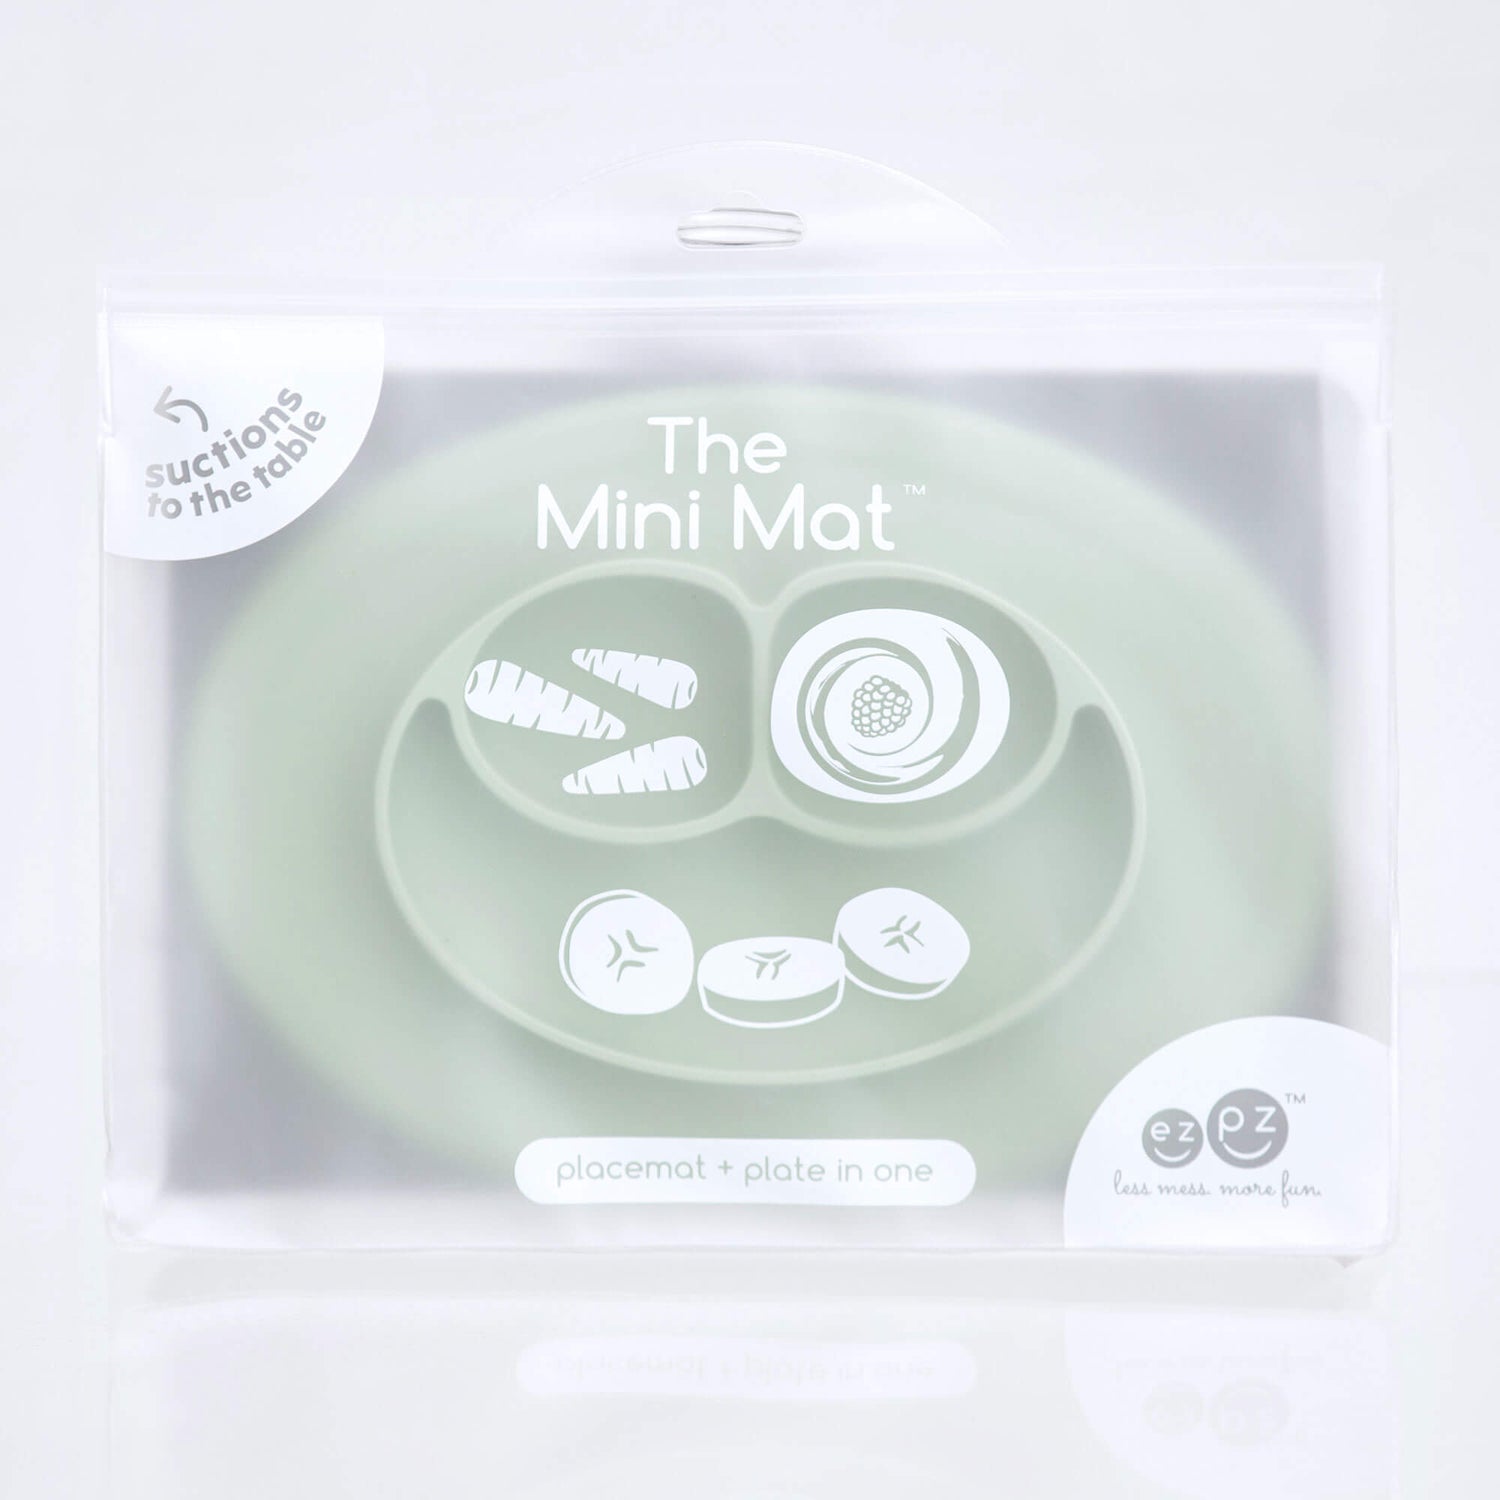 The Mini Mat in Sage by ezpz / Self-Suctioning Silicone Plate + Placemat